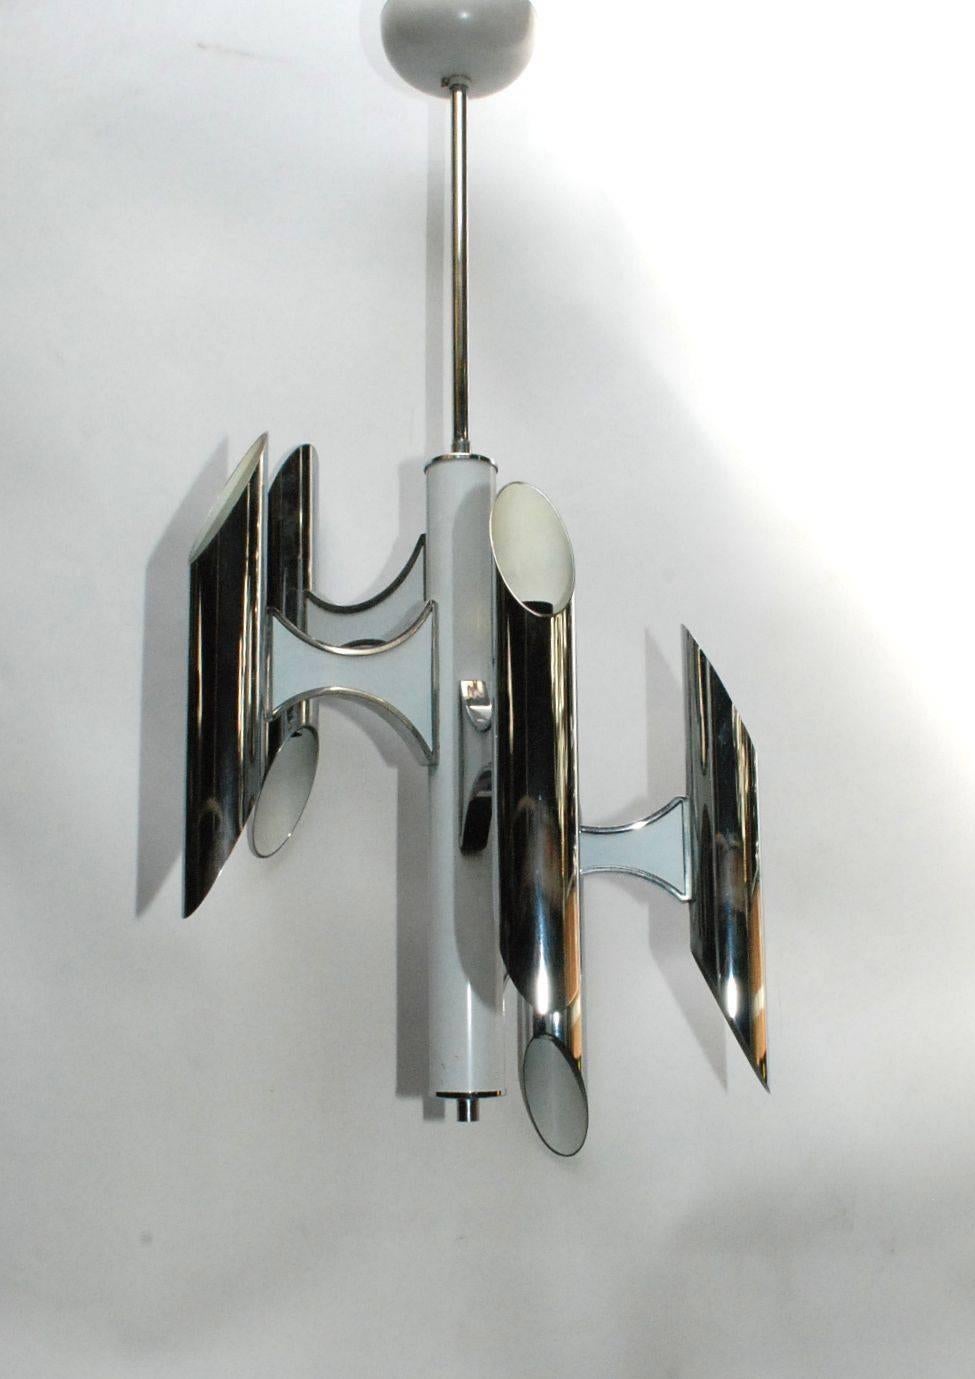 Vintage Italian cream and chrome enameled metal pendant / Designed by Sciolari circa 1960’s / Made in Italy
6 lights / E12 or E14 type / max 40W each
Diameter: 15 inches / Height: 32 inches including rod and canopy
1 in stock in Palm Springs